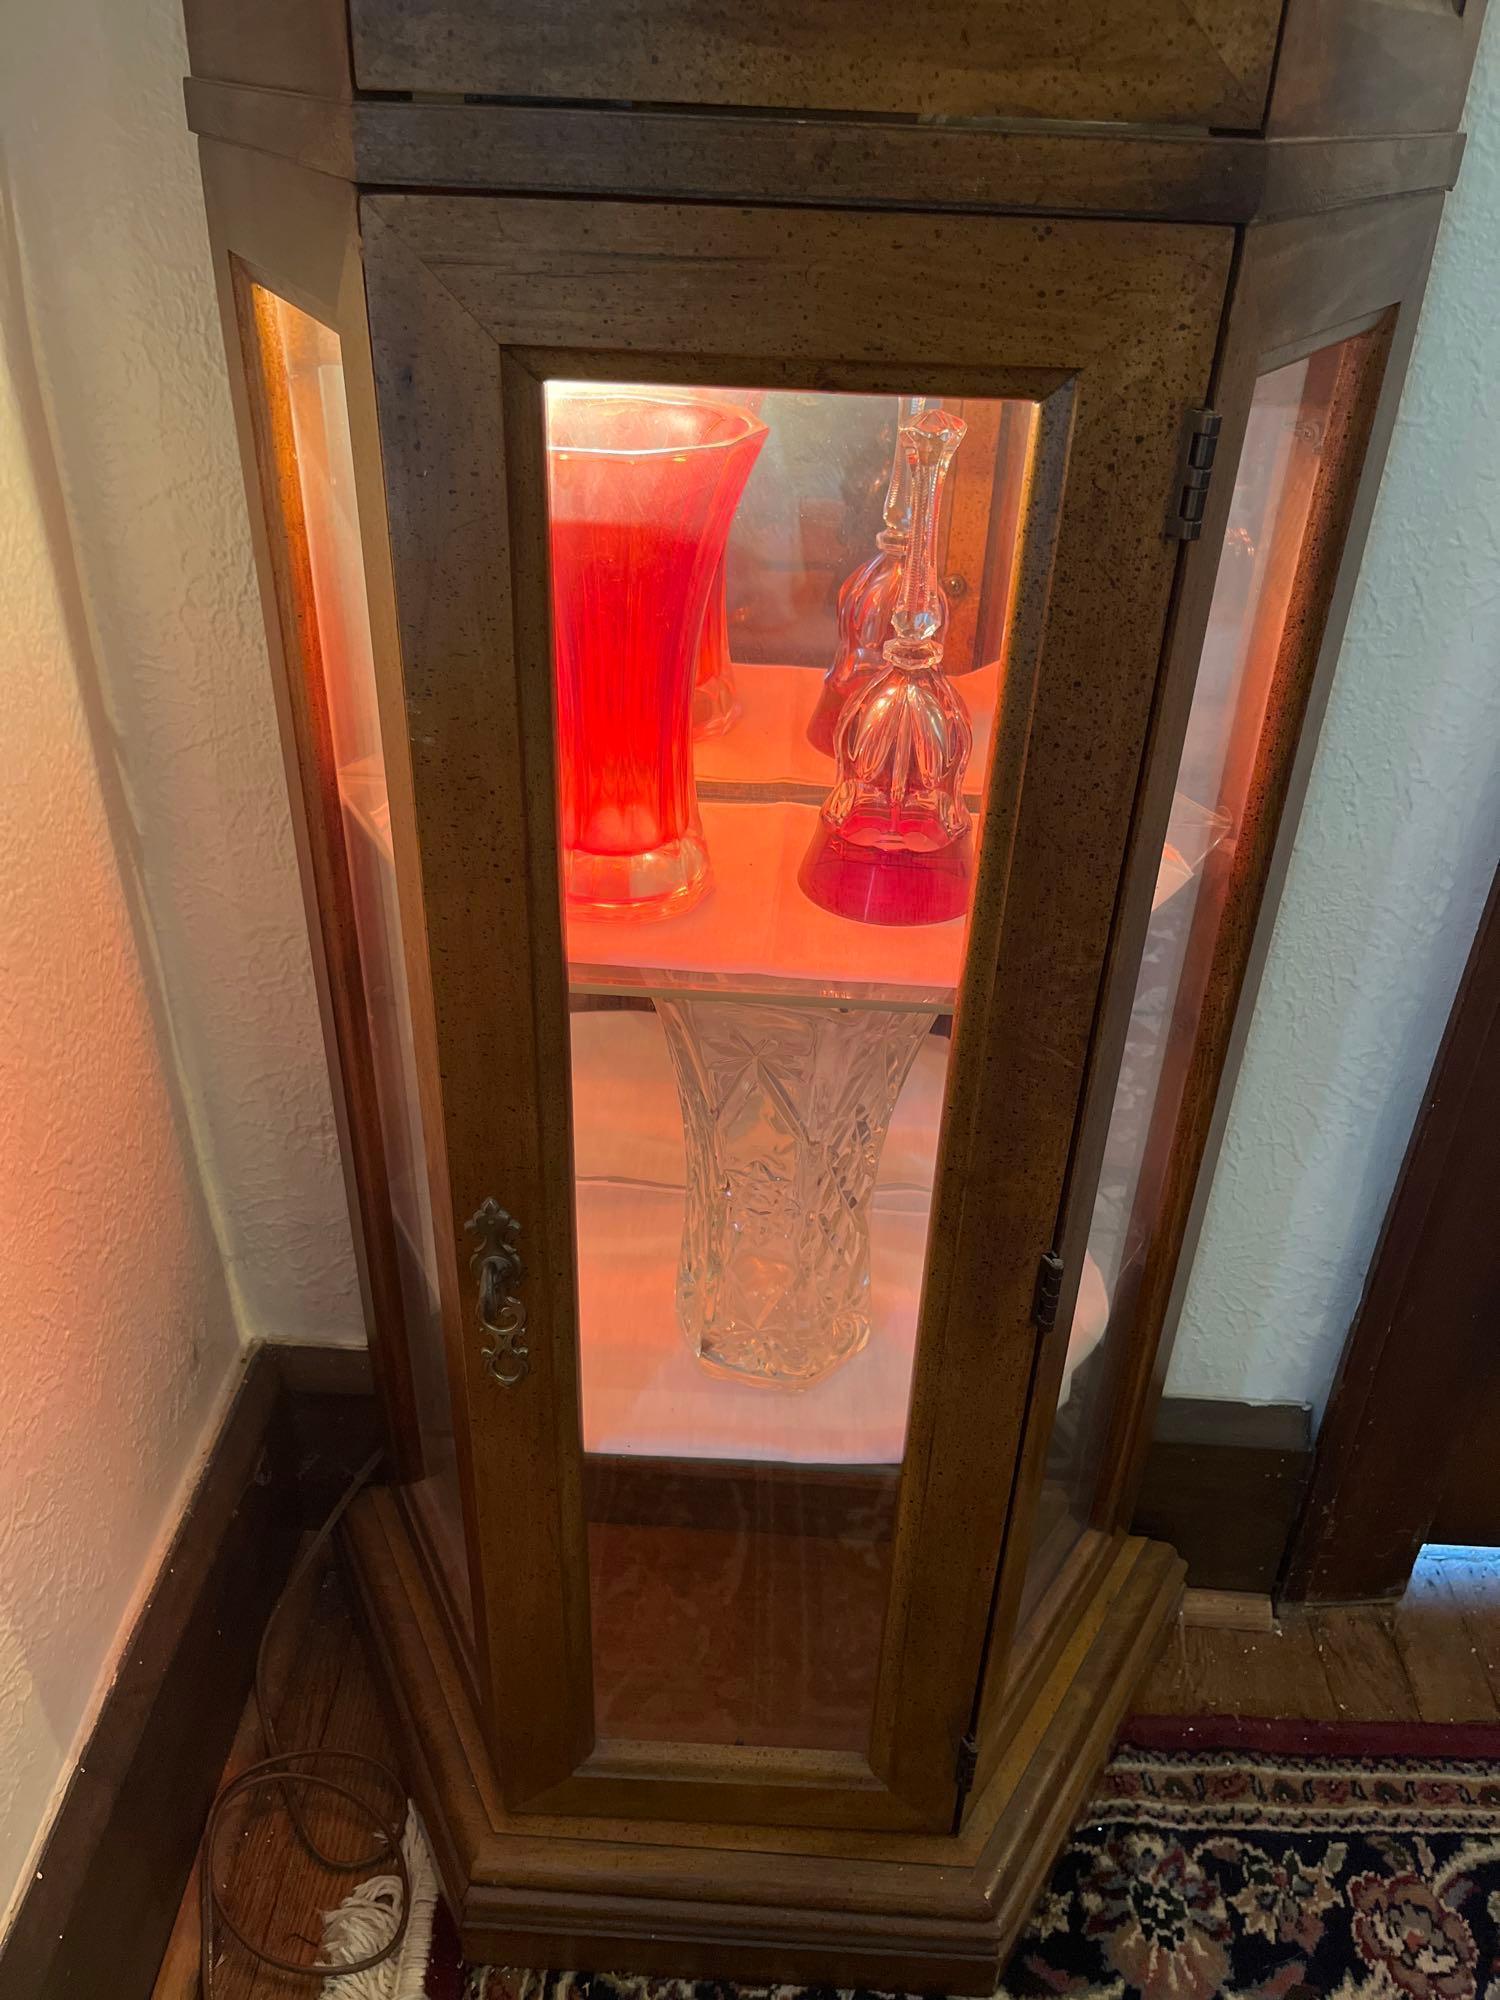 Lighted Curio Cabinet *Contents Not Included*